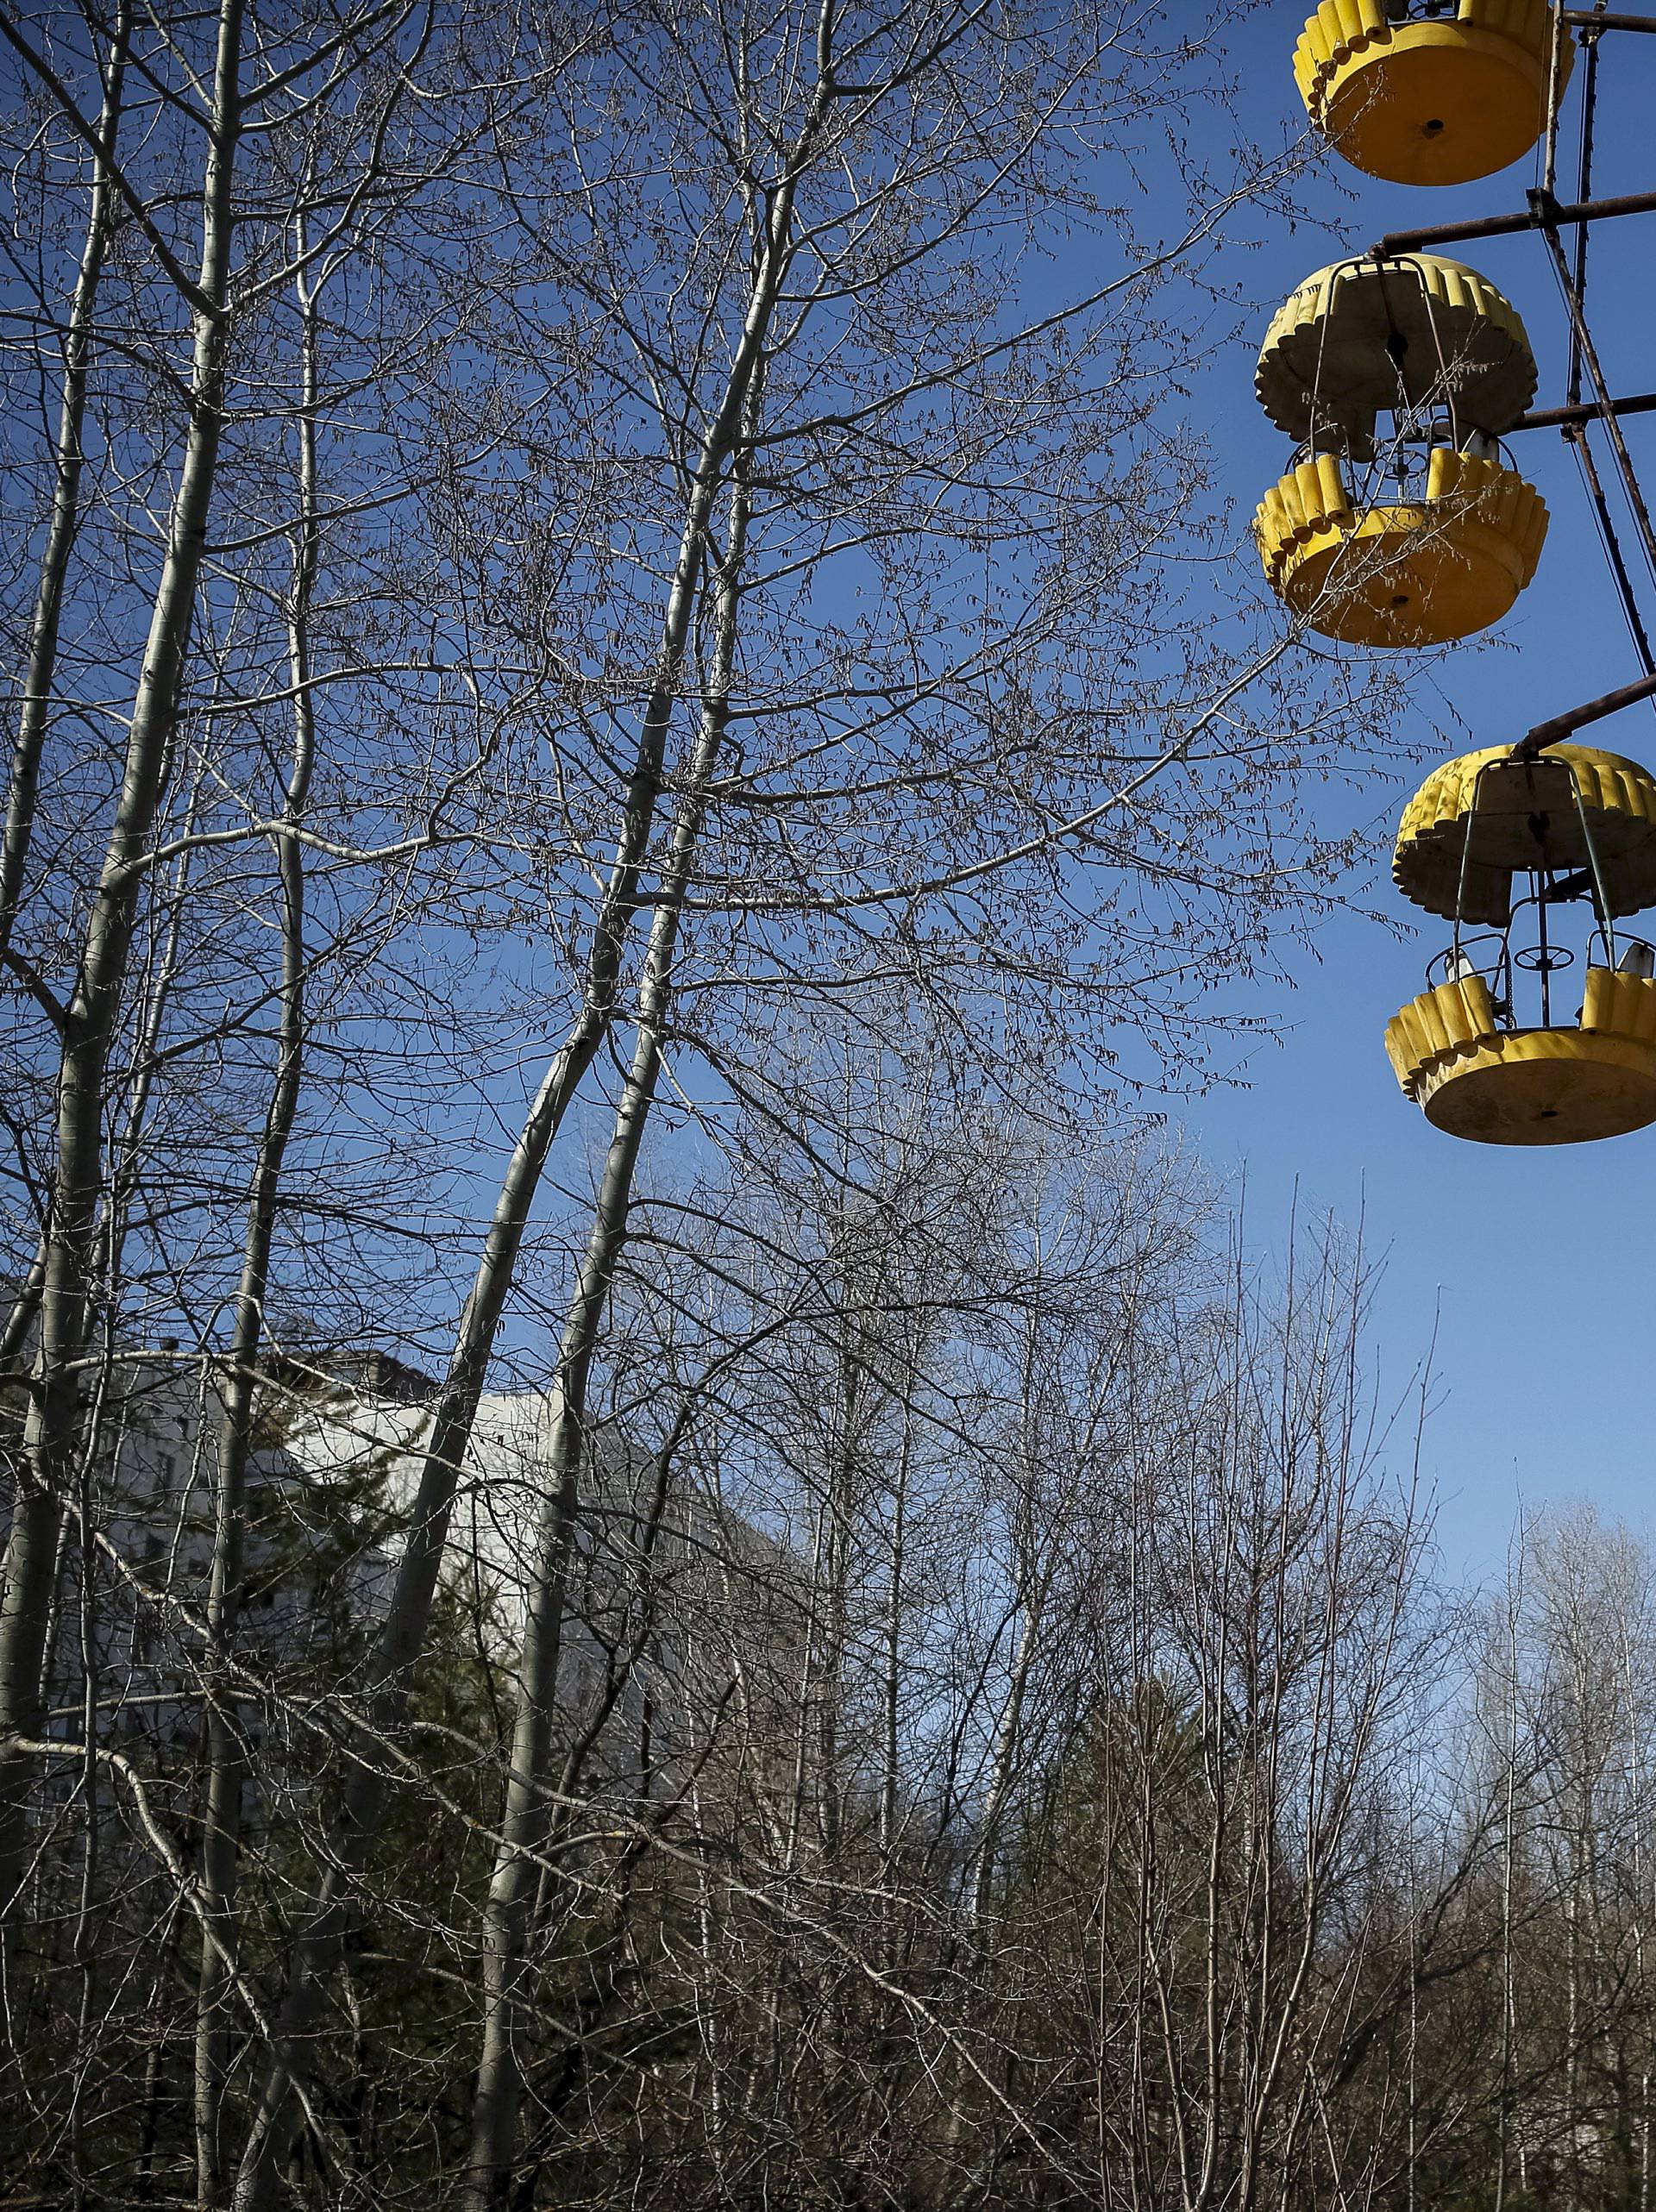 A ferris wheel is seen in the abandoned city of Pripyat near the Chernobyl nuclear power plant